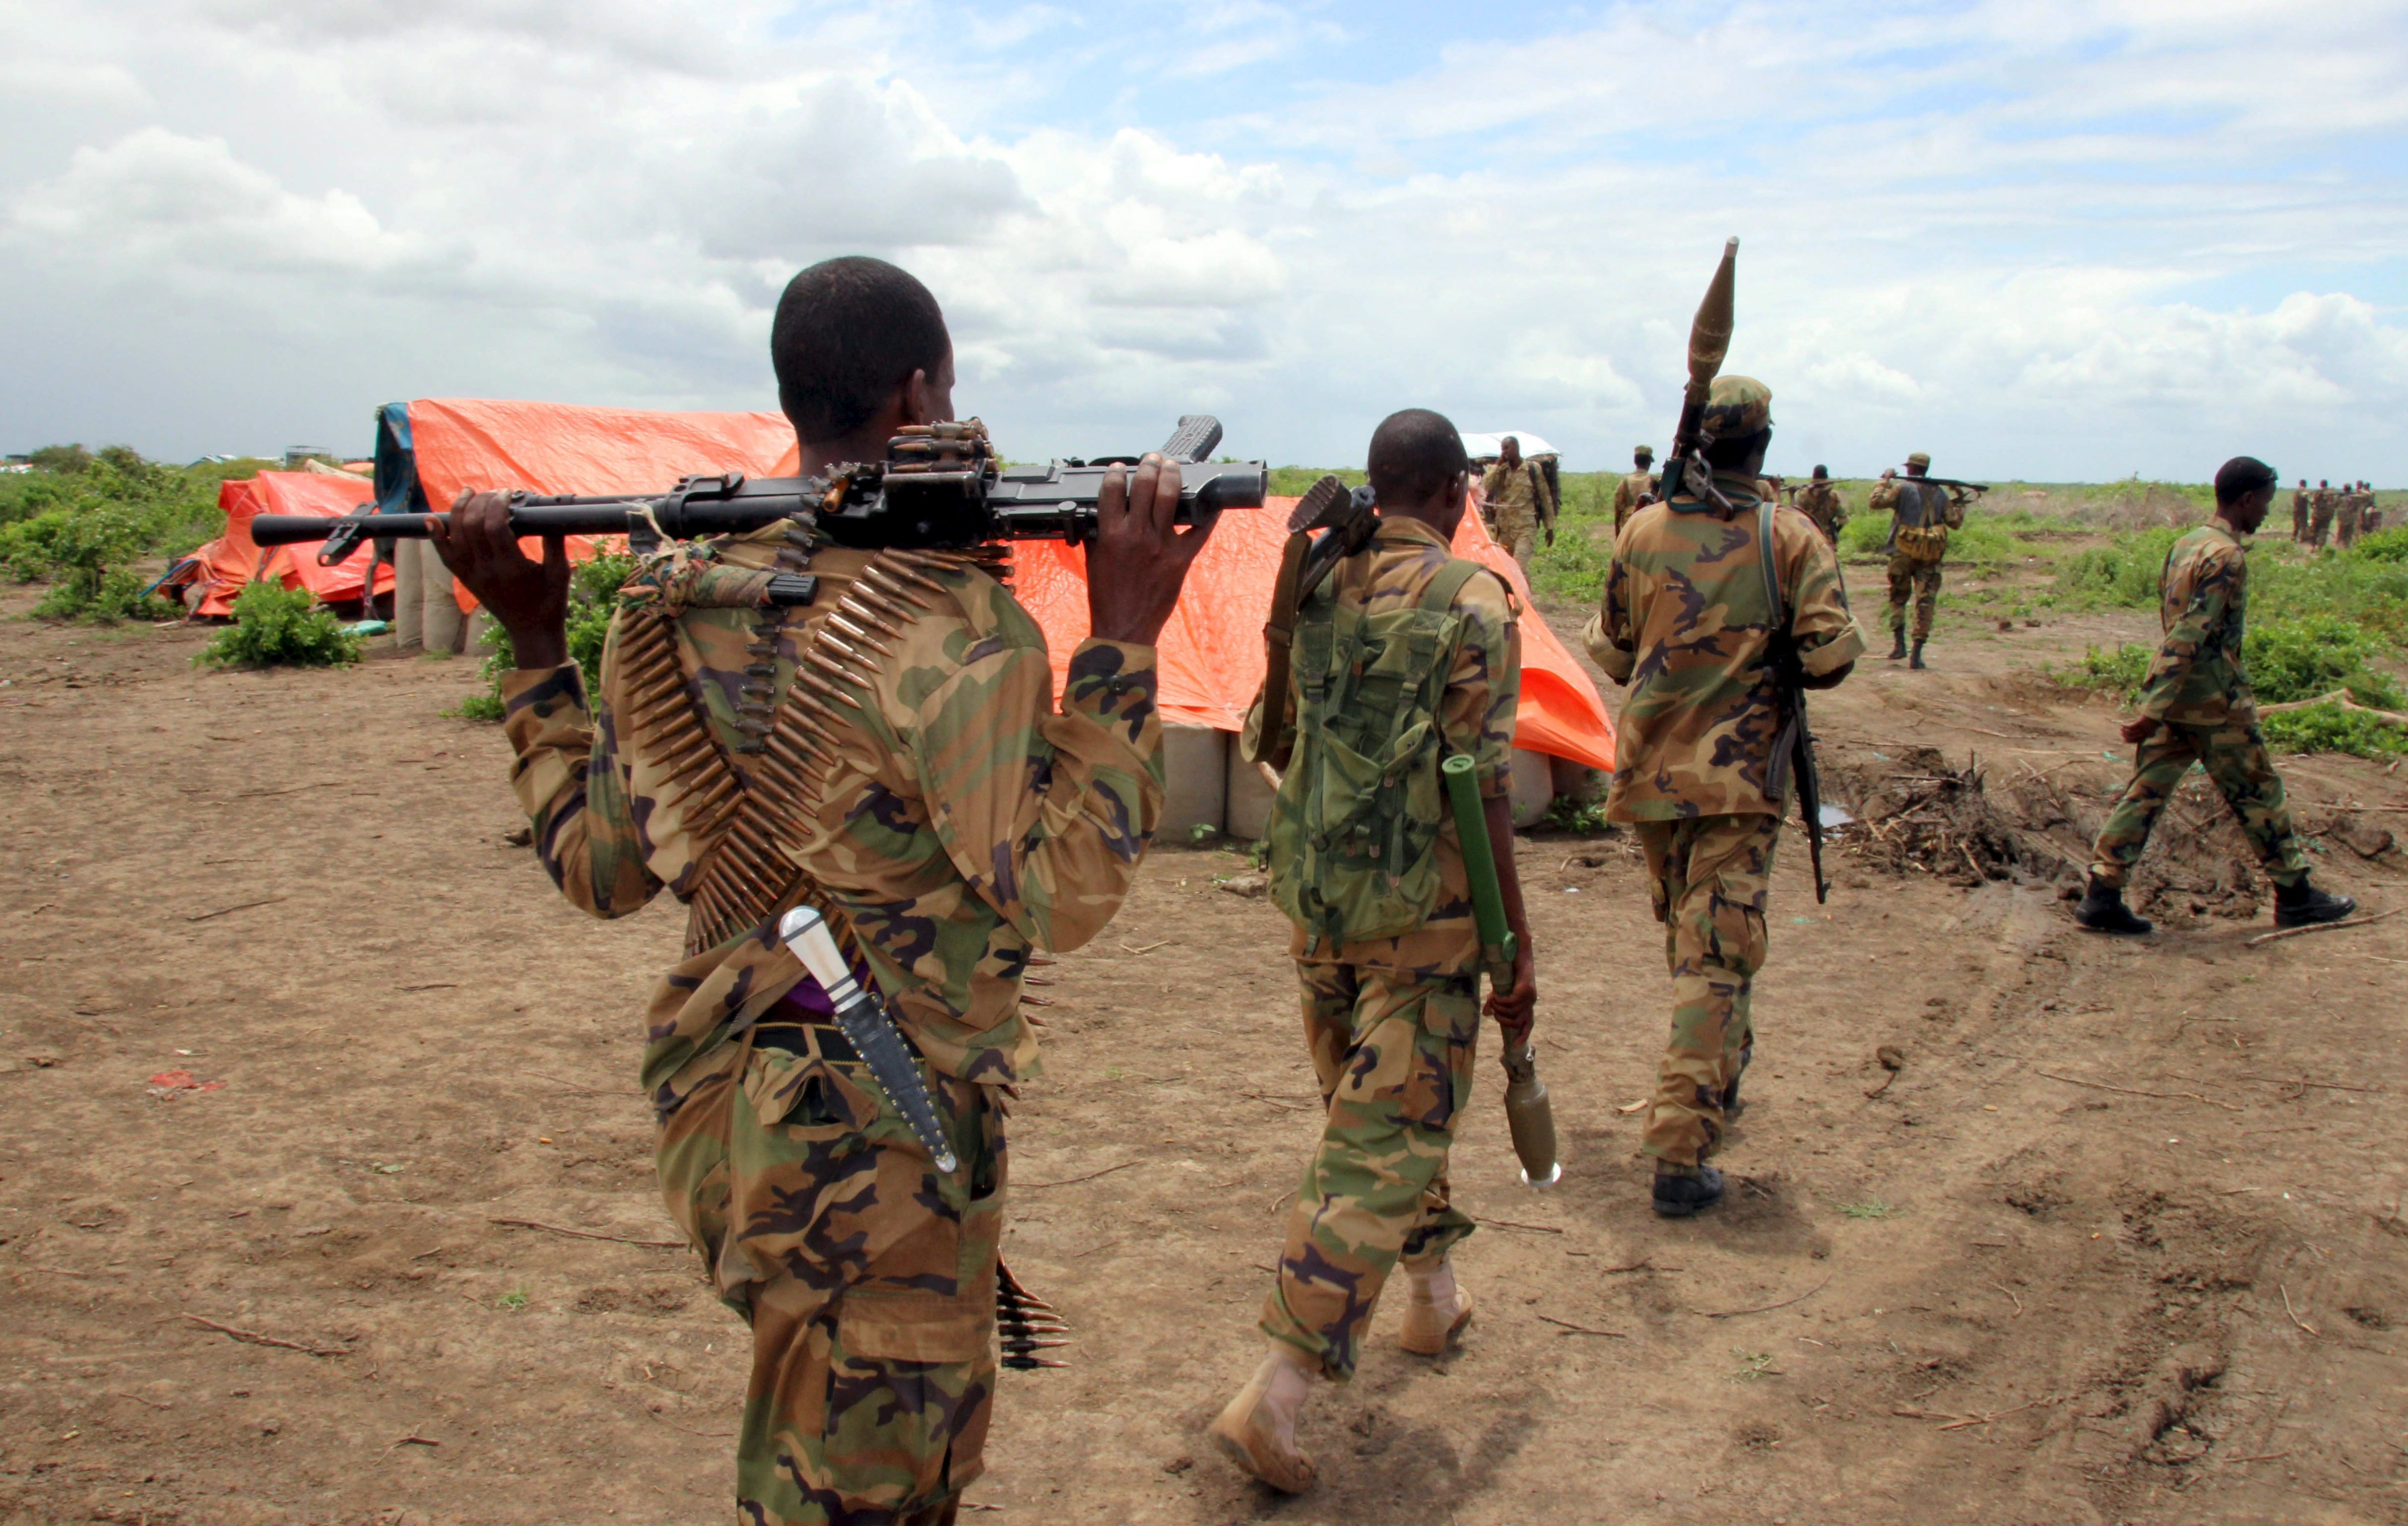 Somalia Militia Claims 47 Soldiers Killed in Army Bases Attack